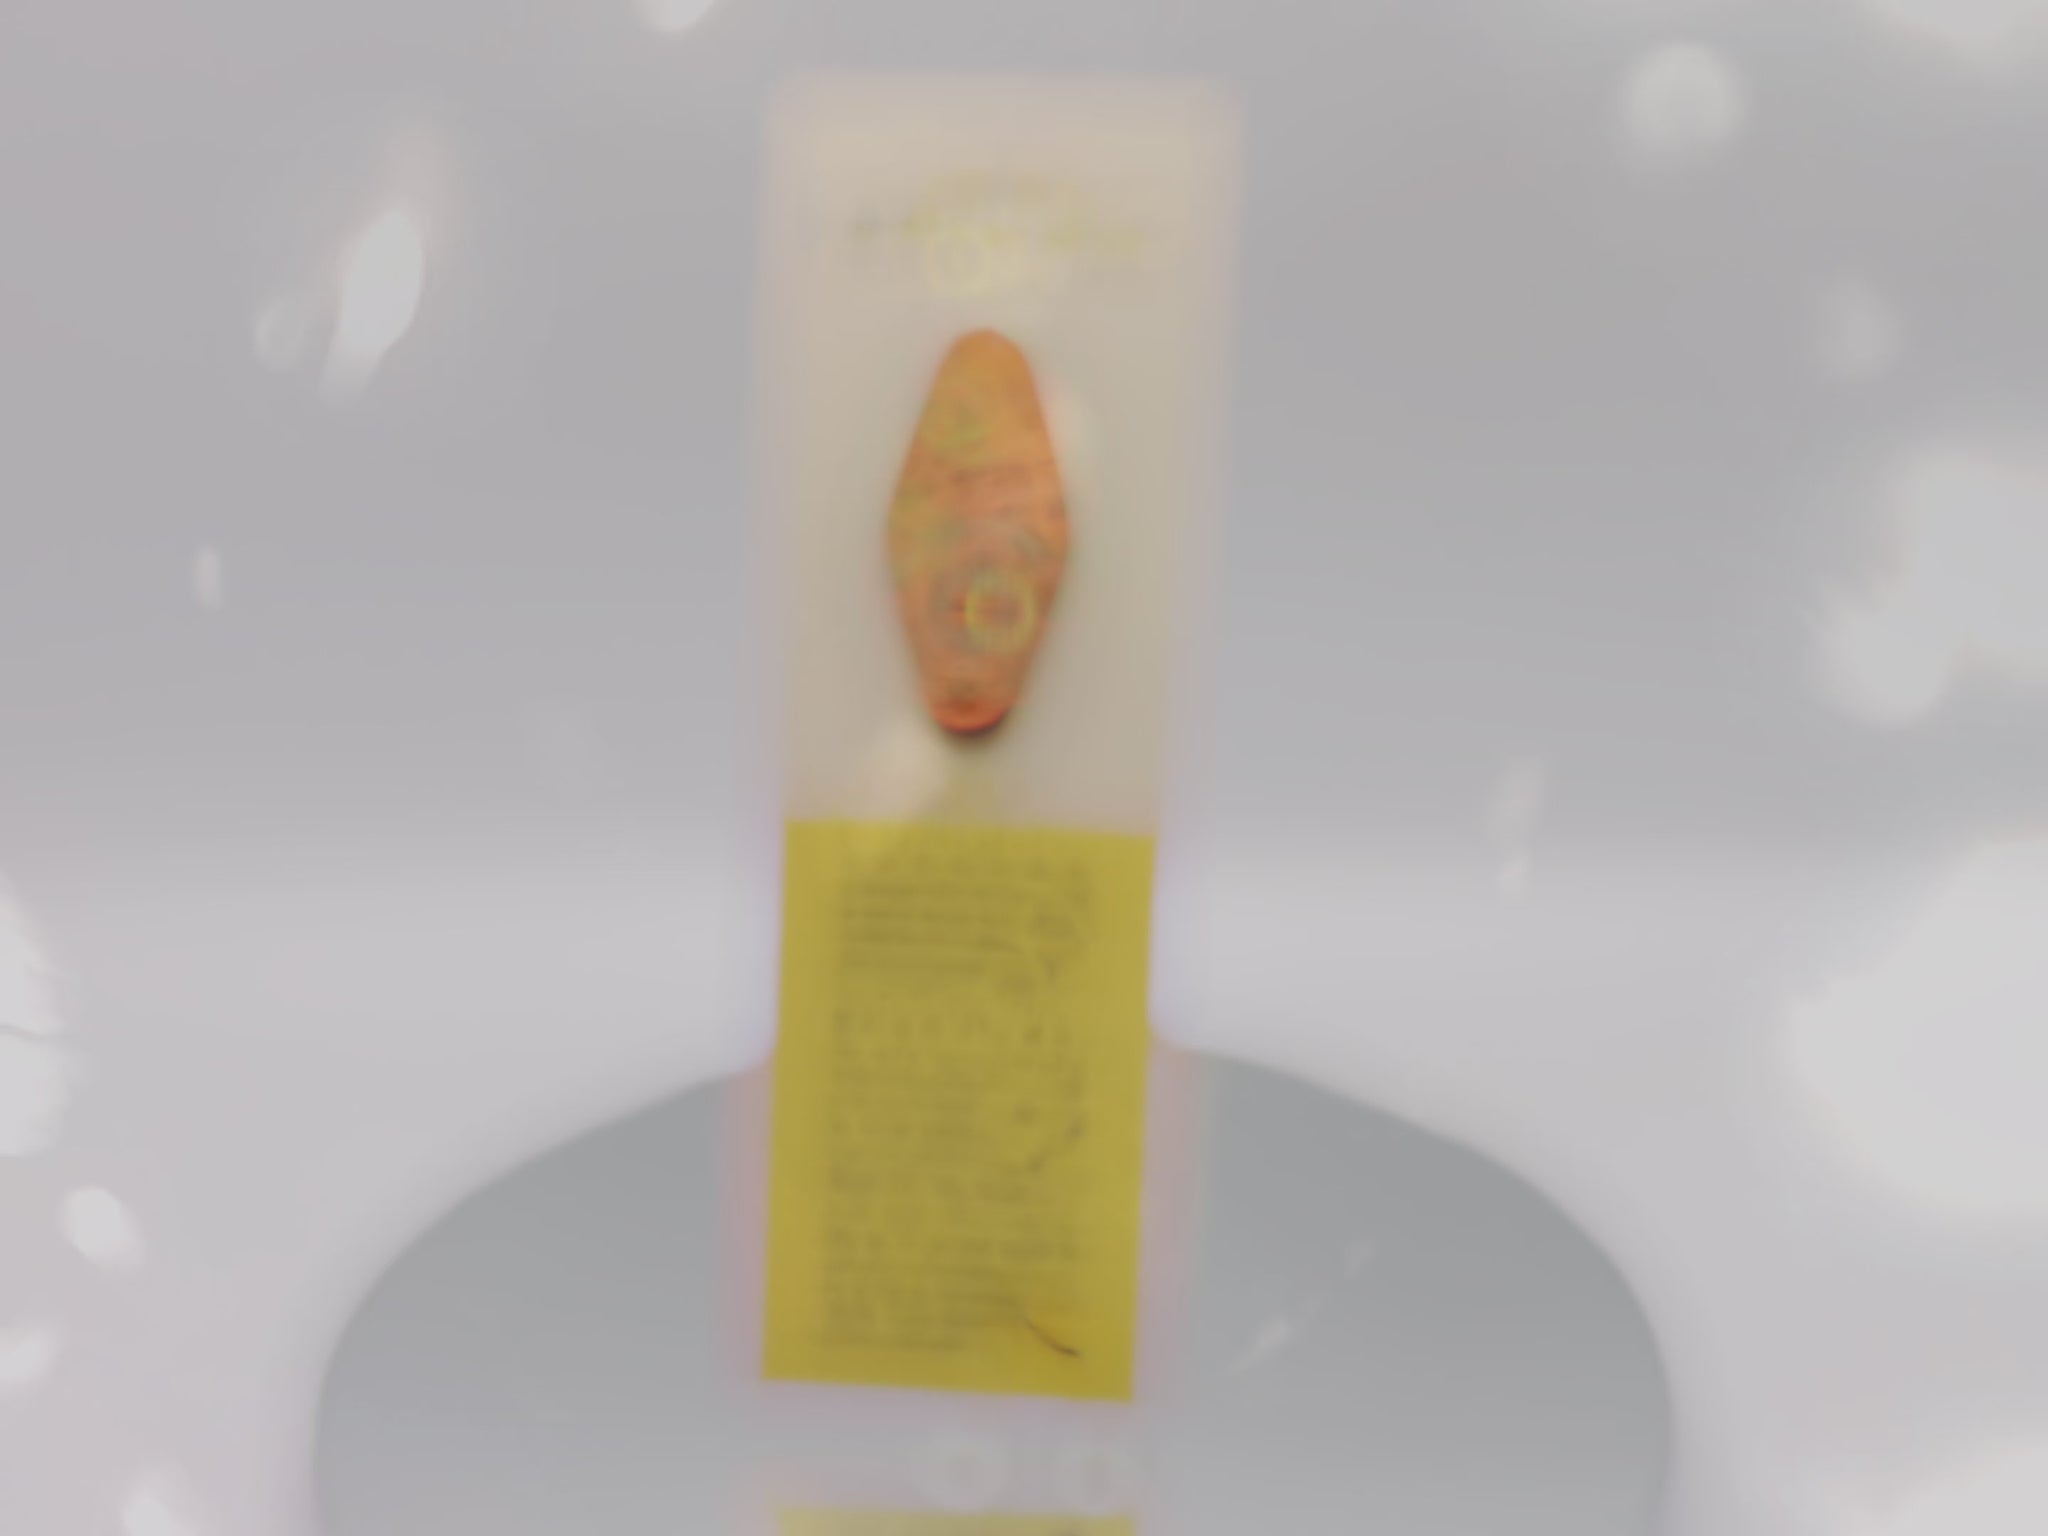 Video of the front and back of the Gold Enamel Talisman Pin with pink design and the words Fandom Talisman sits on a long white and yellow backing card with gold accents. The backing card has details the symbolism of the different design elements of the Talisman pin.